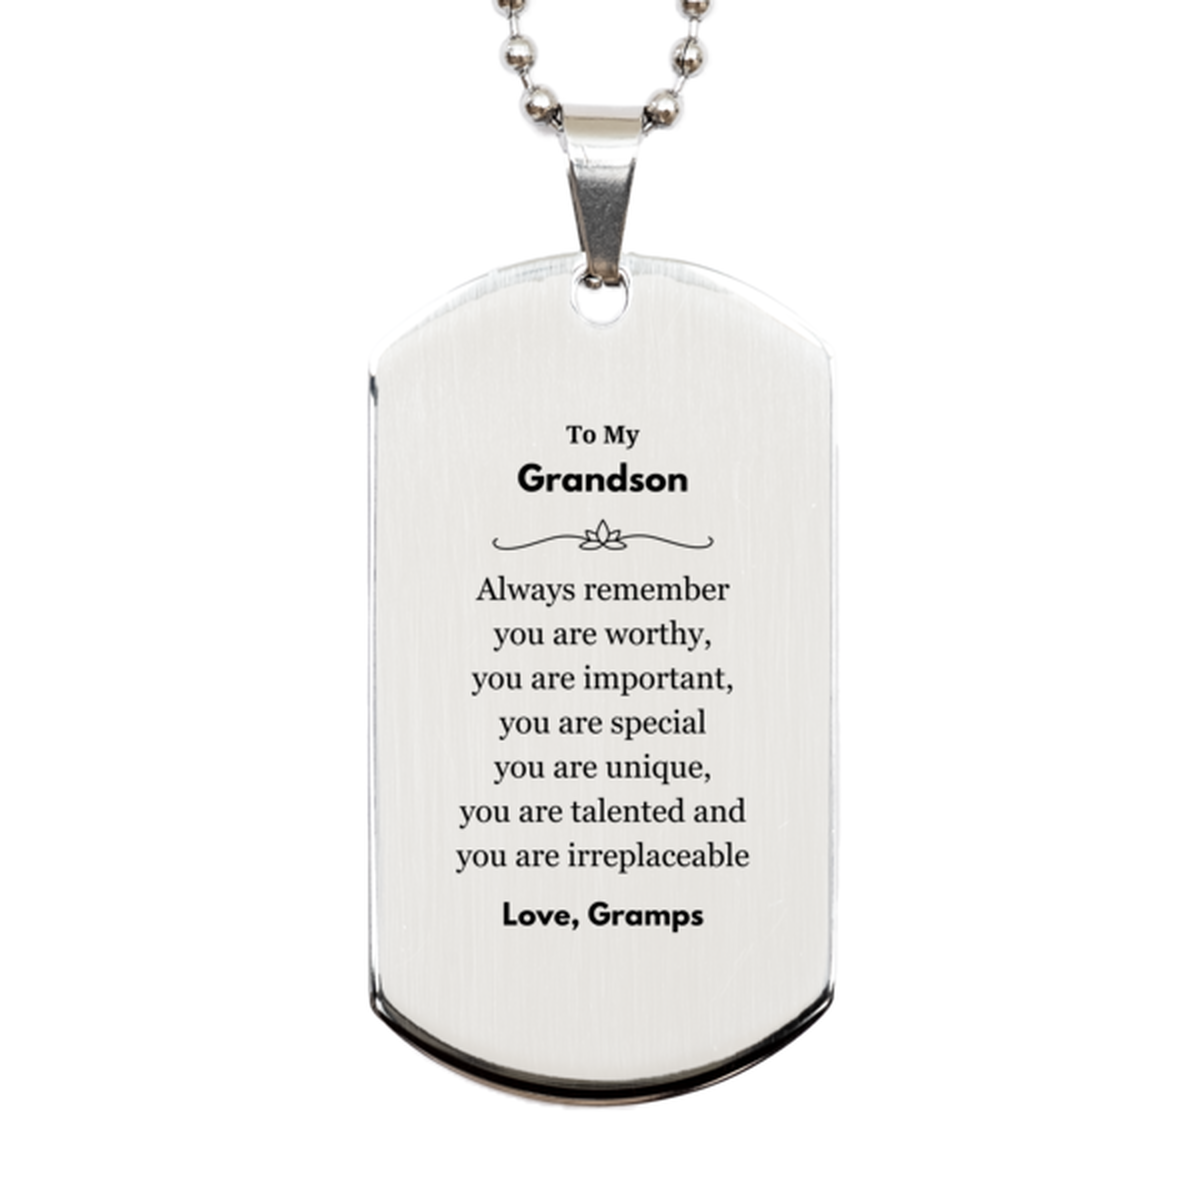 Grandson Birthday Gifts from Gramps, Inspirational Silver Dog Tag for Grandson Christmas Graduation Gifts for Grandson Always remember you are worthy, you are important. Love, Gramps